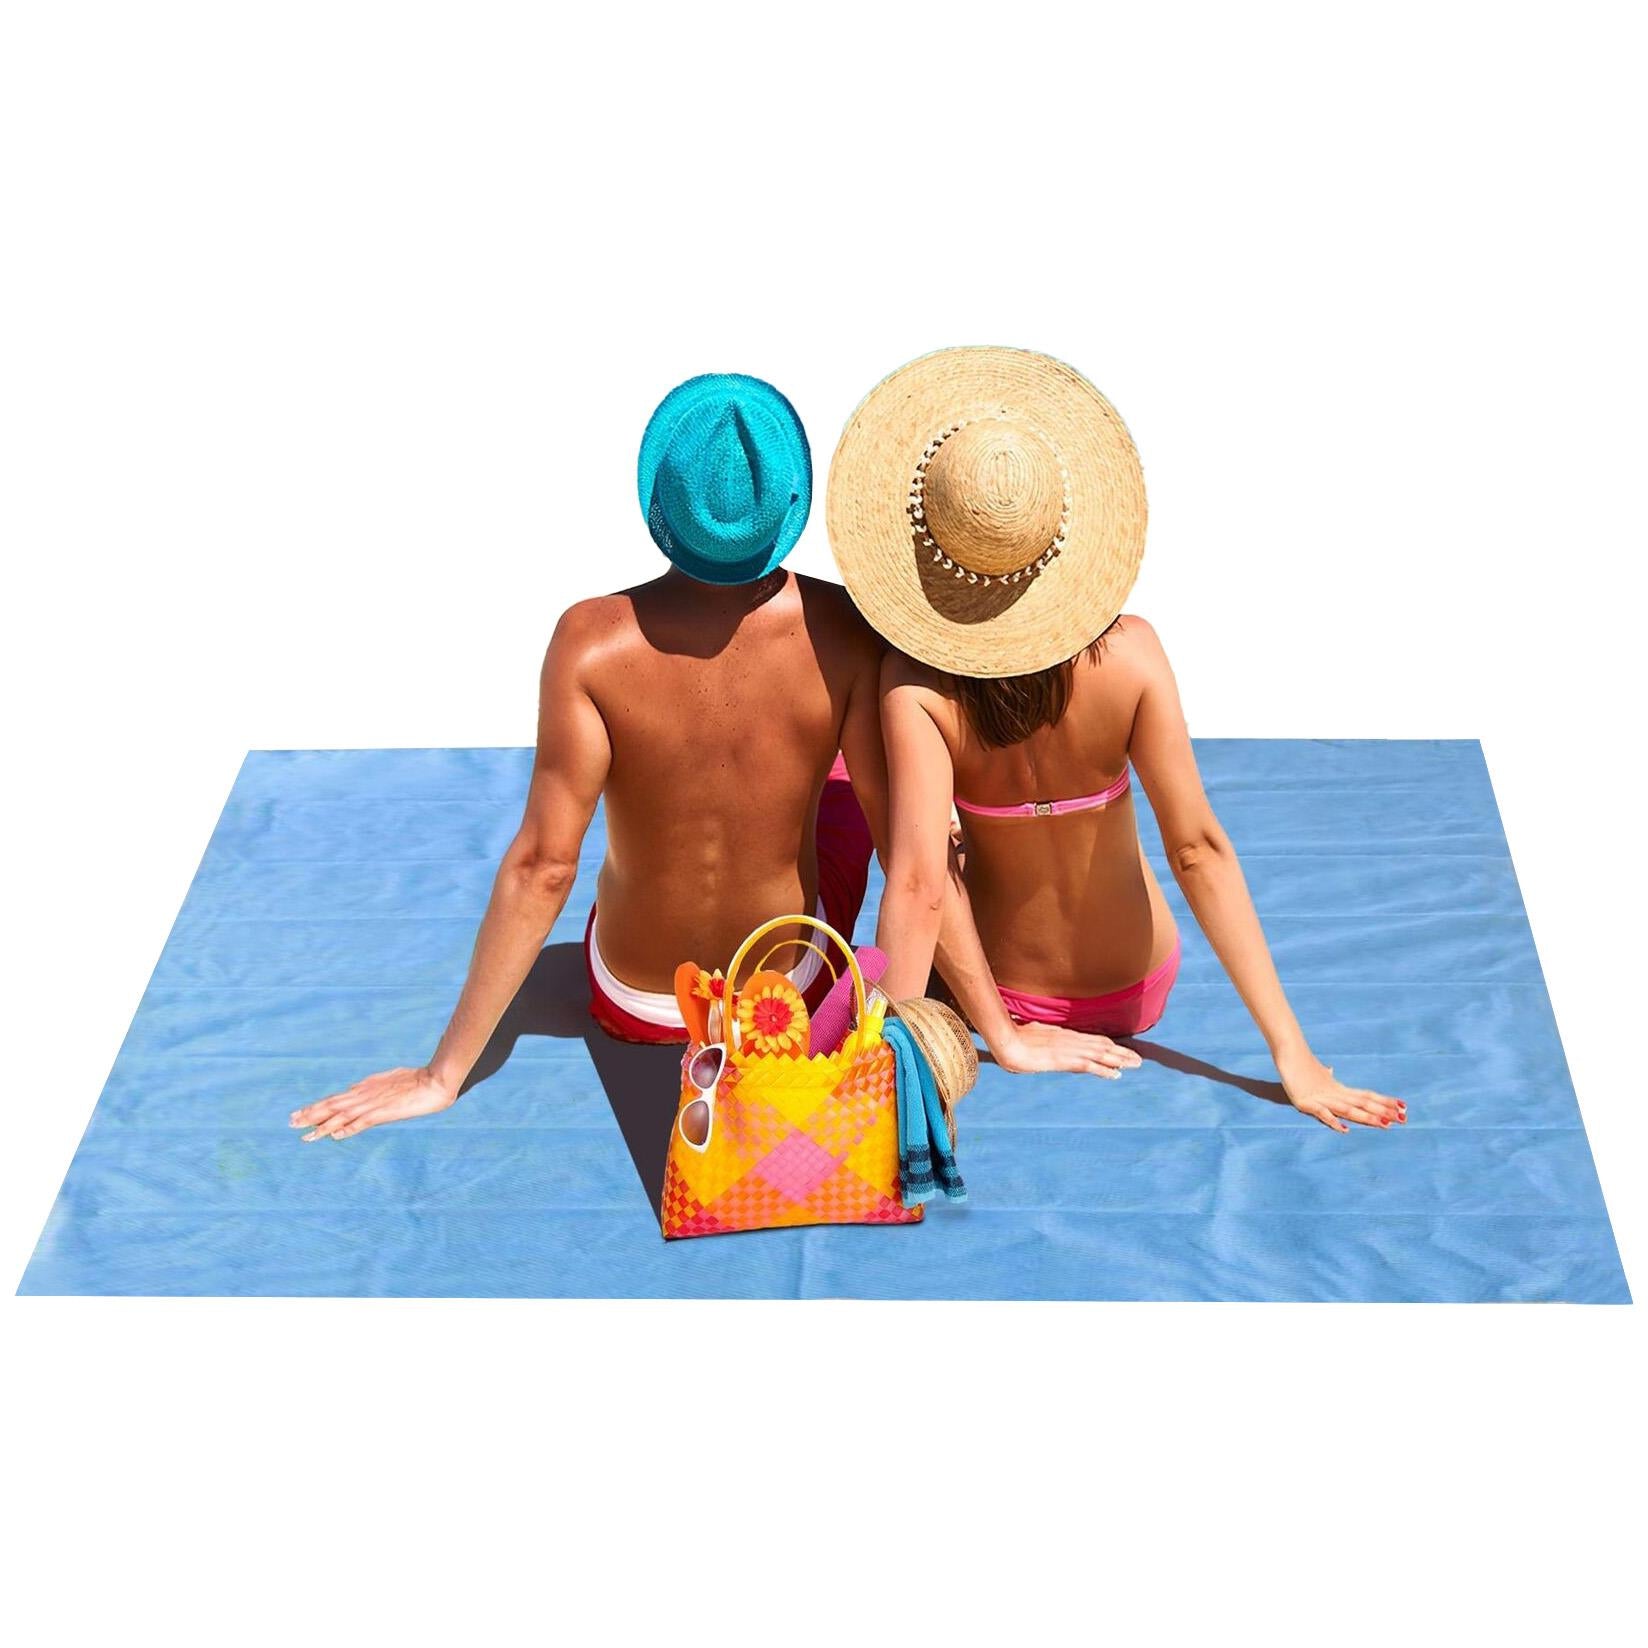 Sand Free Foldable Beach Mat by GEEZY - The Magic Toy Shop